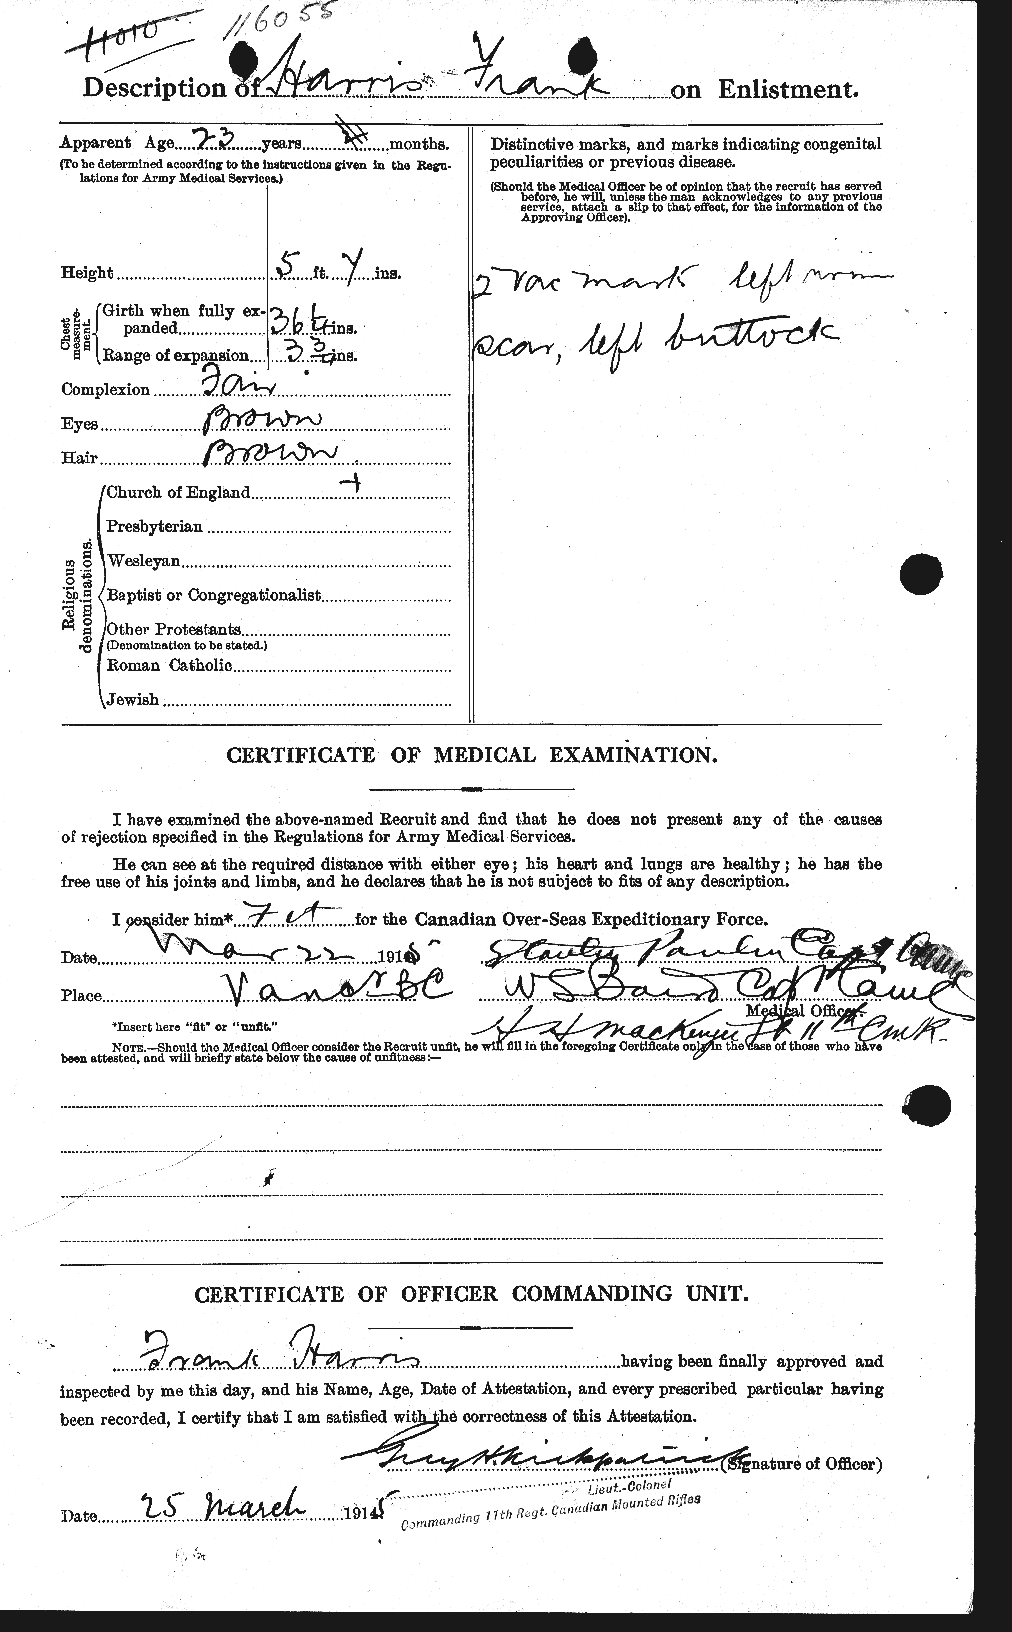 Personnel Records of the First World War - CEF 379318b